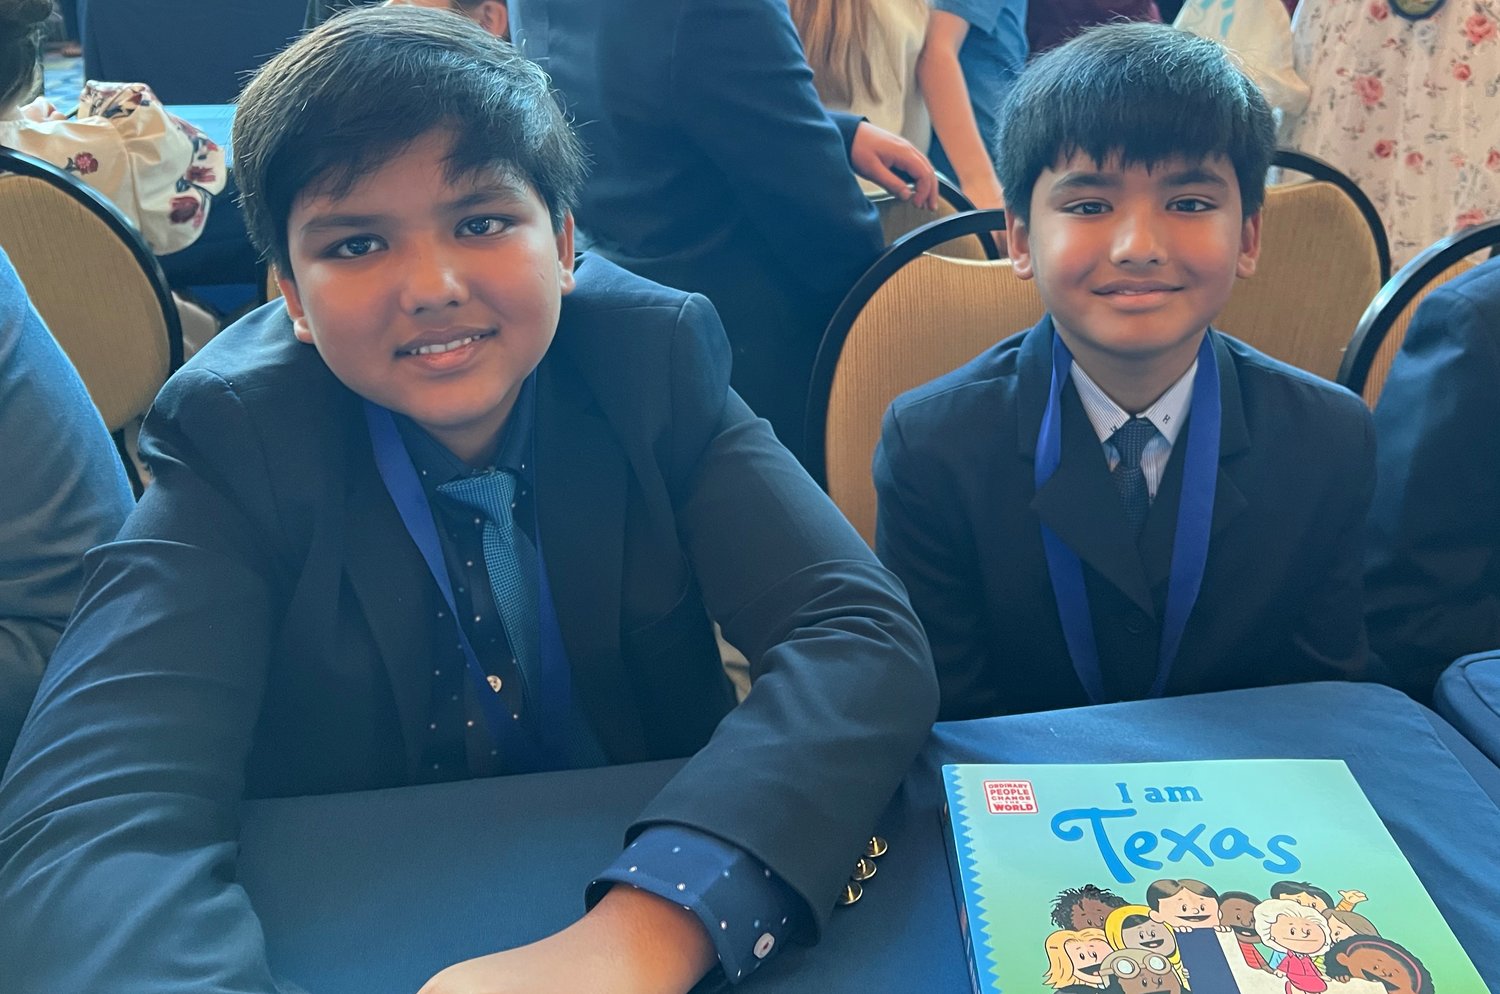 Brosthers Dhruv and Darsh Amitabh are excited to both have their short stories published in iWRITE's 2022 children's book, "I Am Texas," especially with it being the largest for kids by kids book in the world.